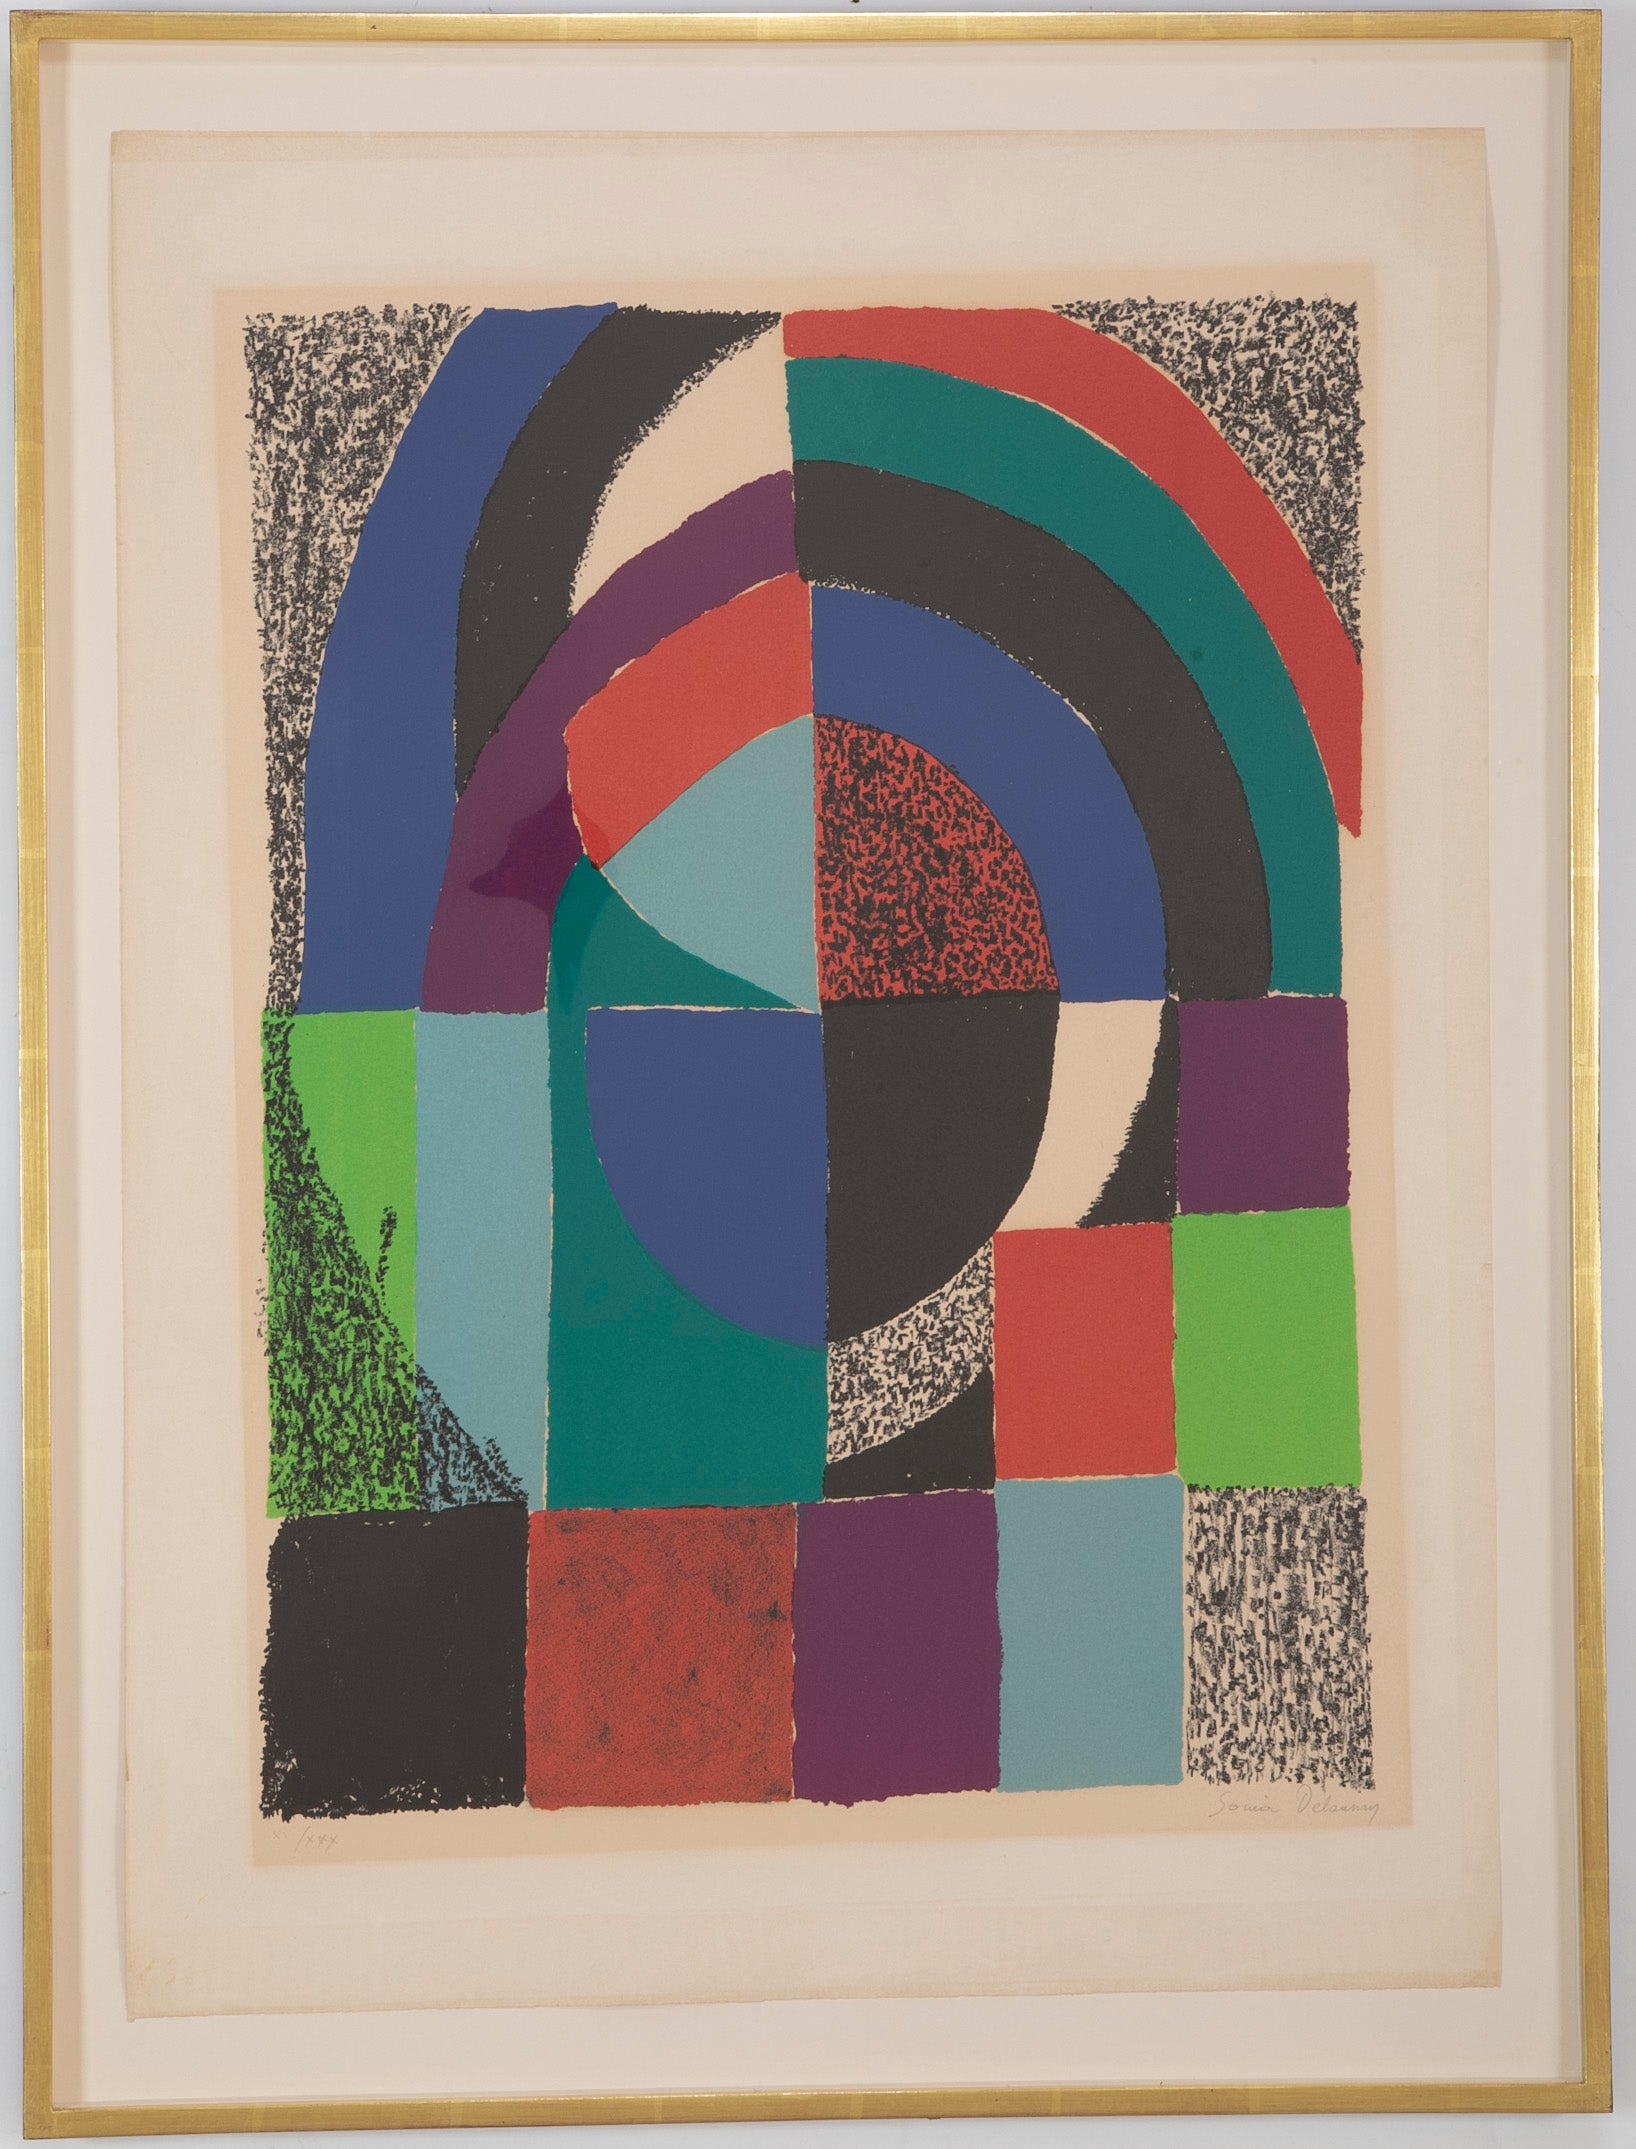 "Cathedrale, 1971" Lithograph in Colors by Sonia Delaunay